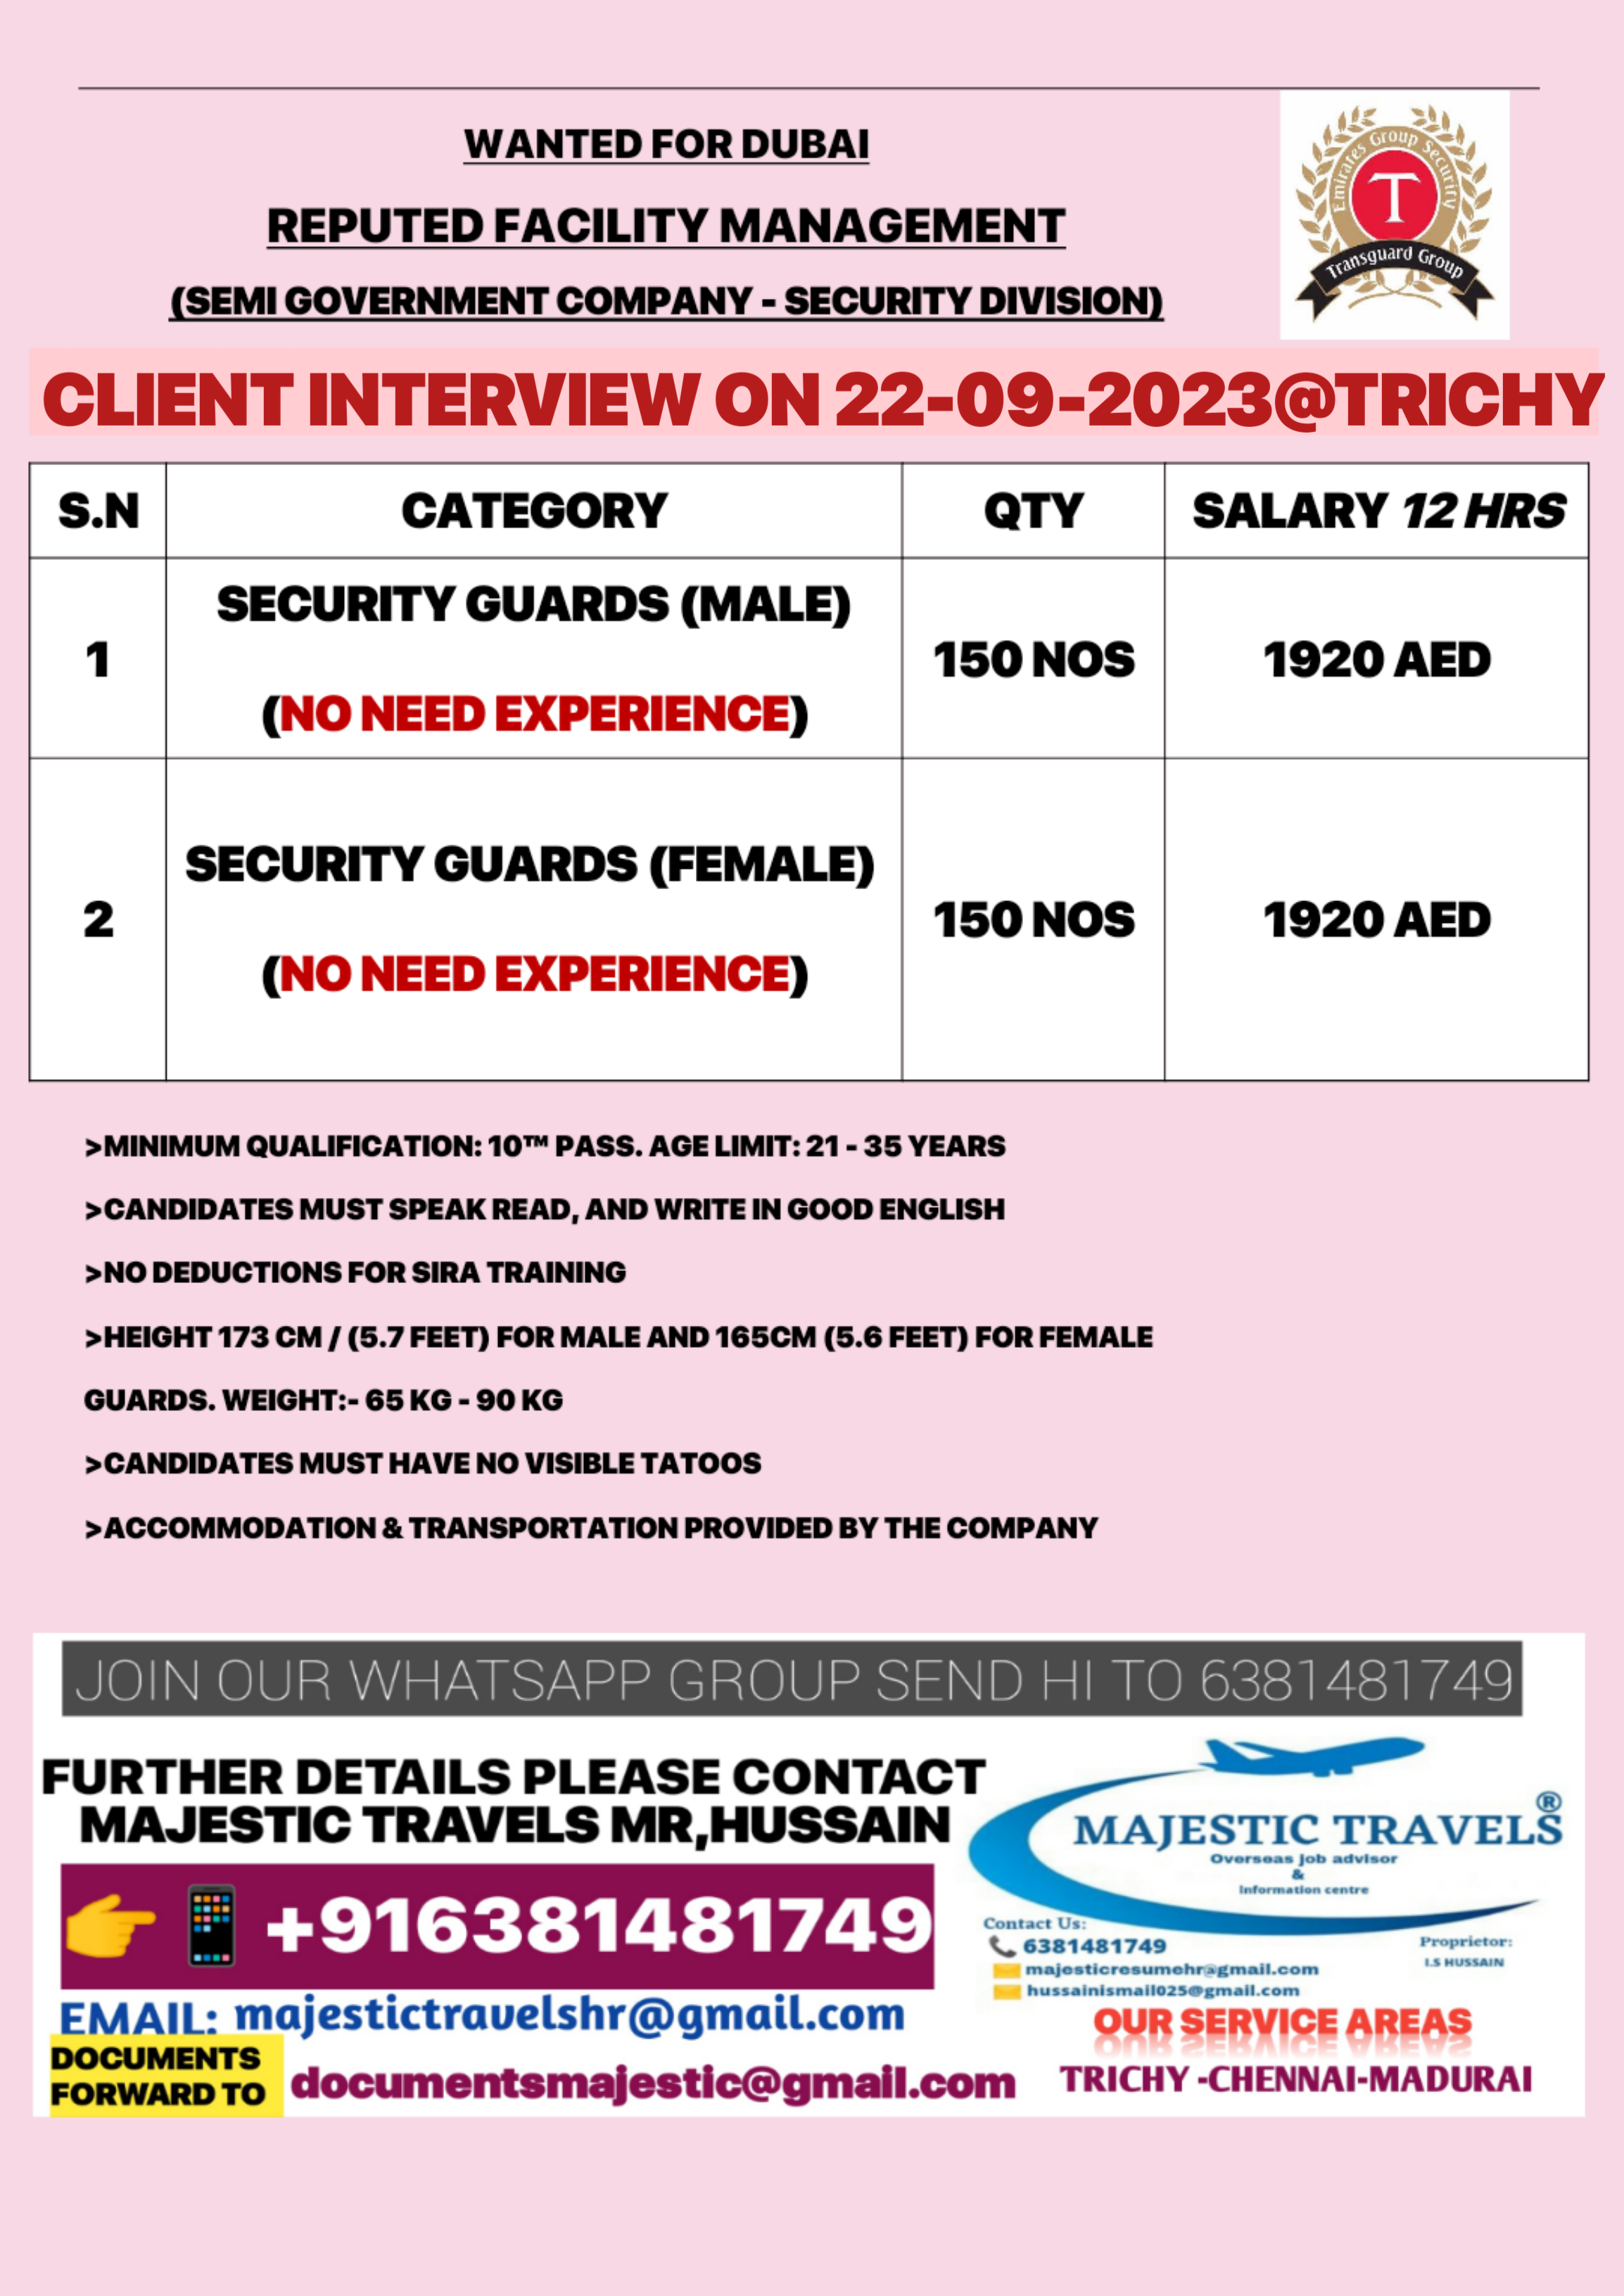 JOB OPENINGS FOR CHENNAI JOB OPENINGS FOR DUBAI COMPANY NAME TRANSGUARD CLIENT INTERVIEW ON 22-09-2023@TRICHY